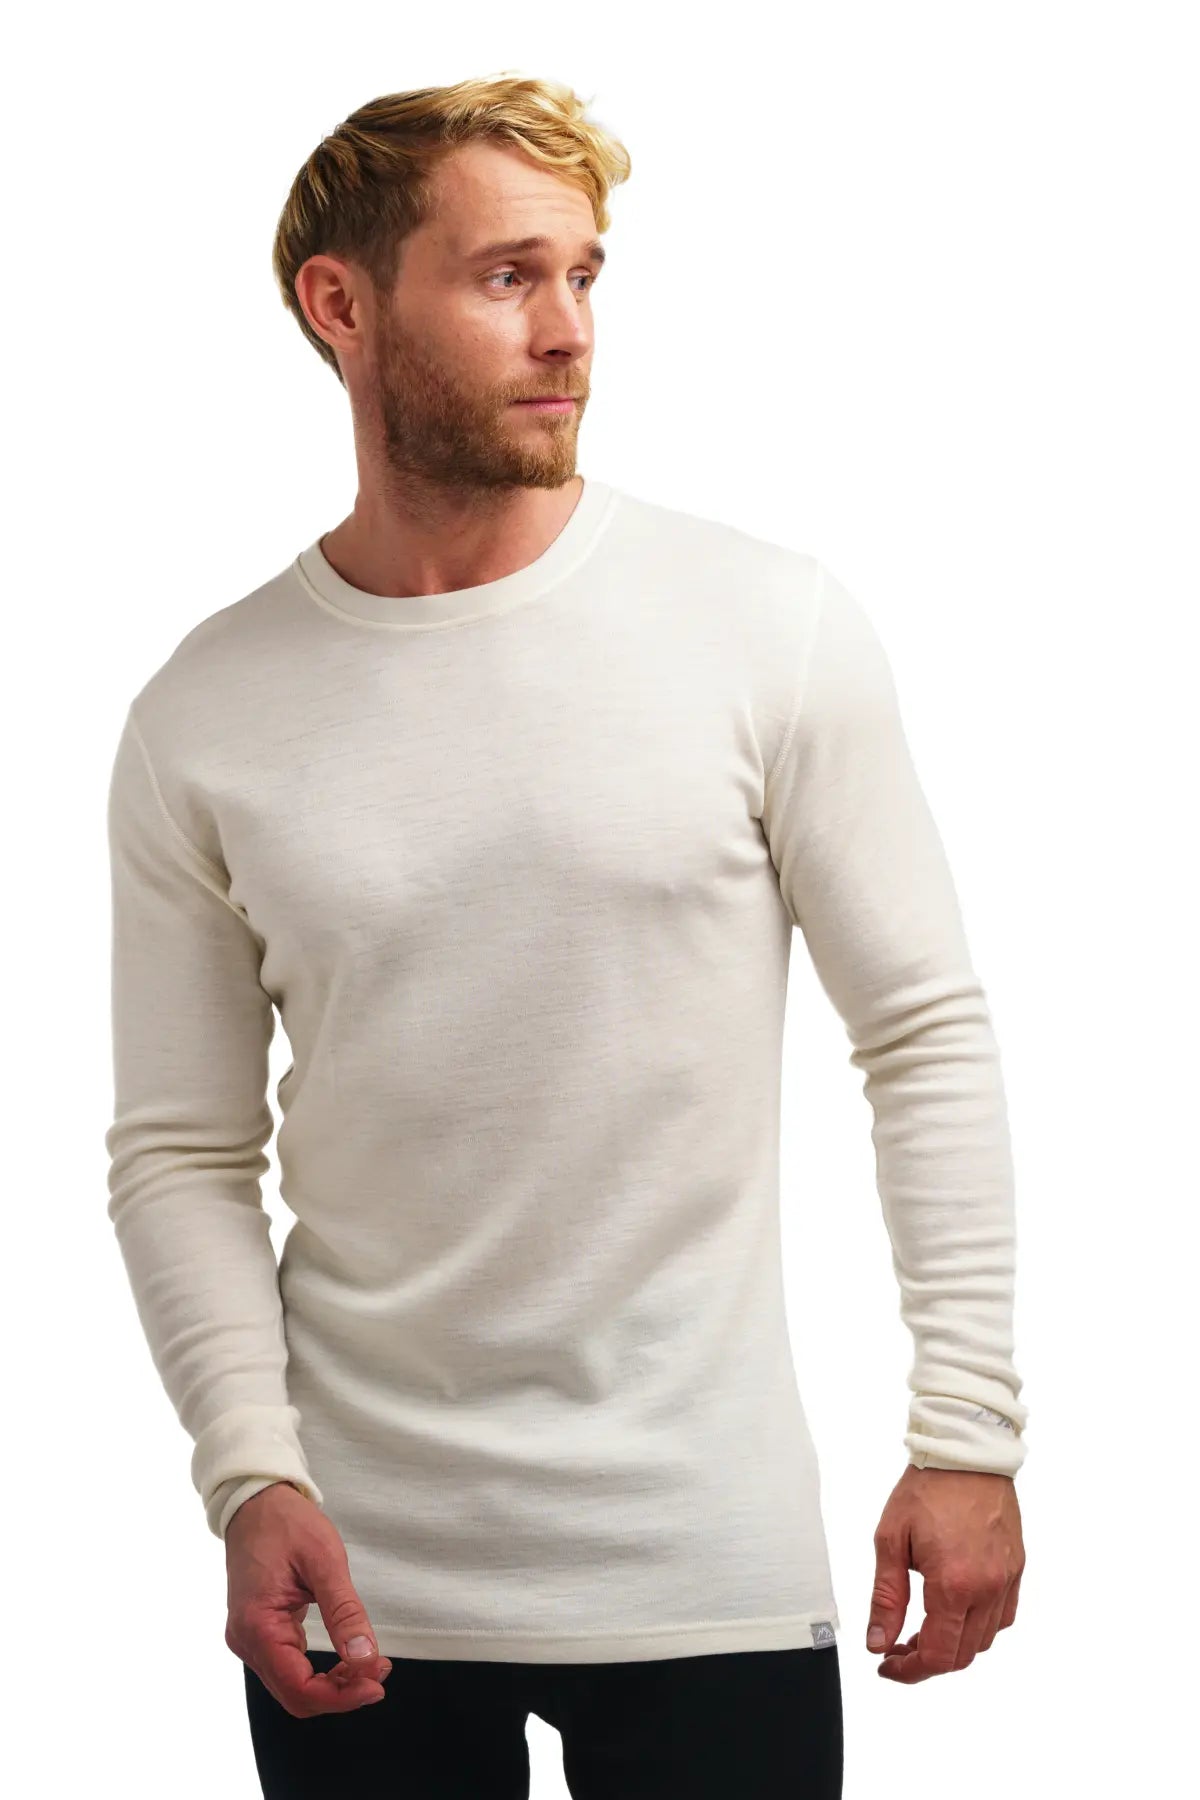 Men's Merino Wool Apparel: Your Ultimate Outdoor Wardrobe – Tagged